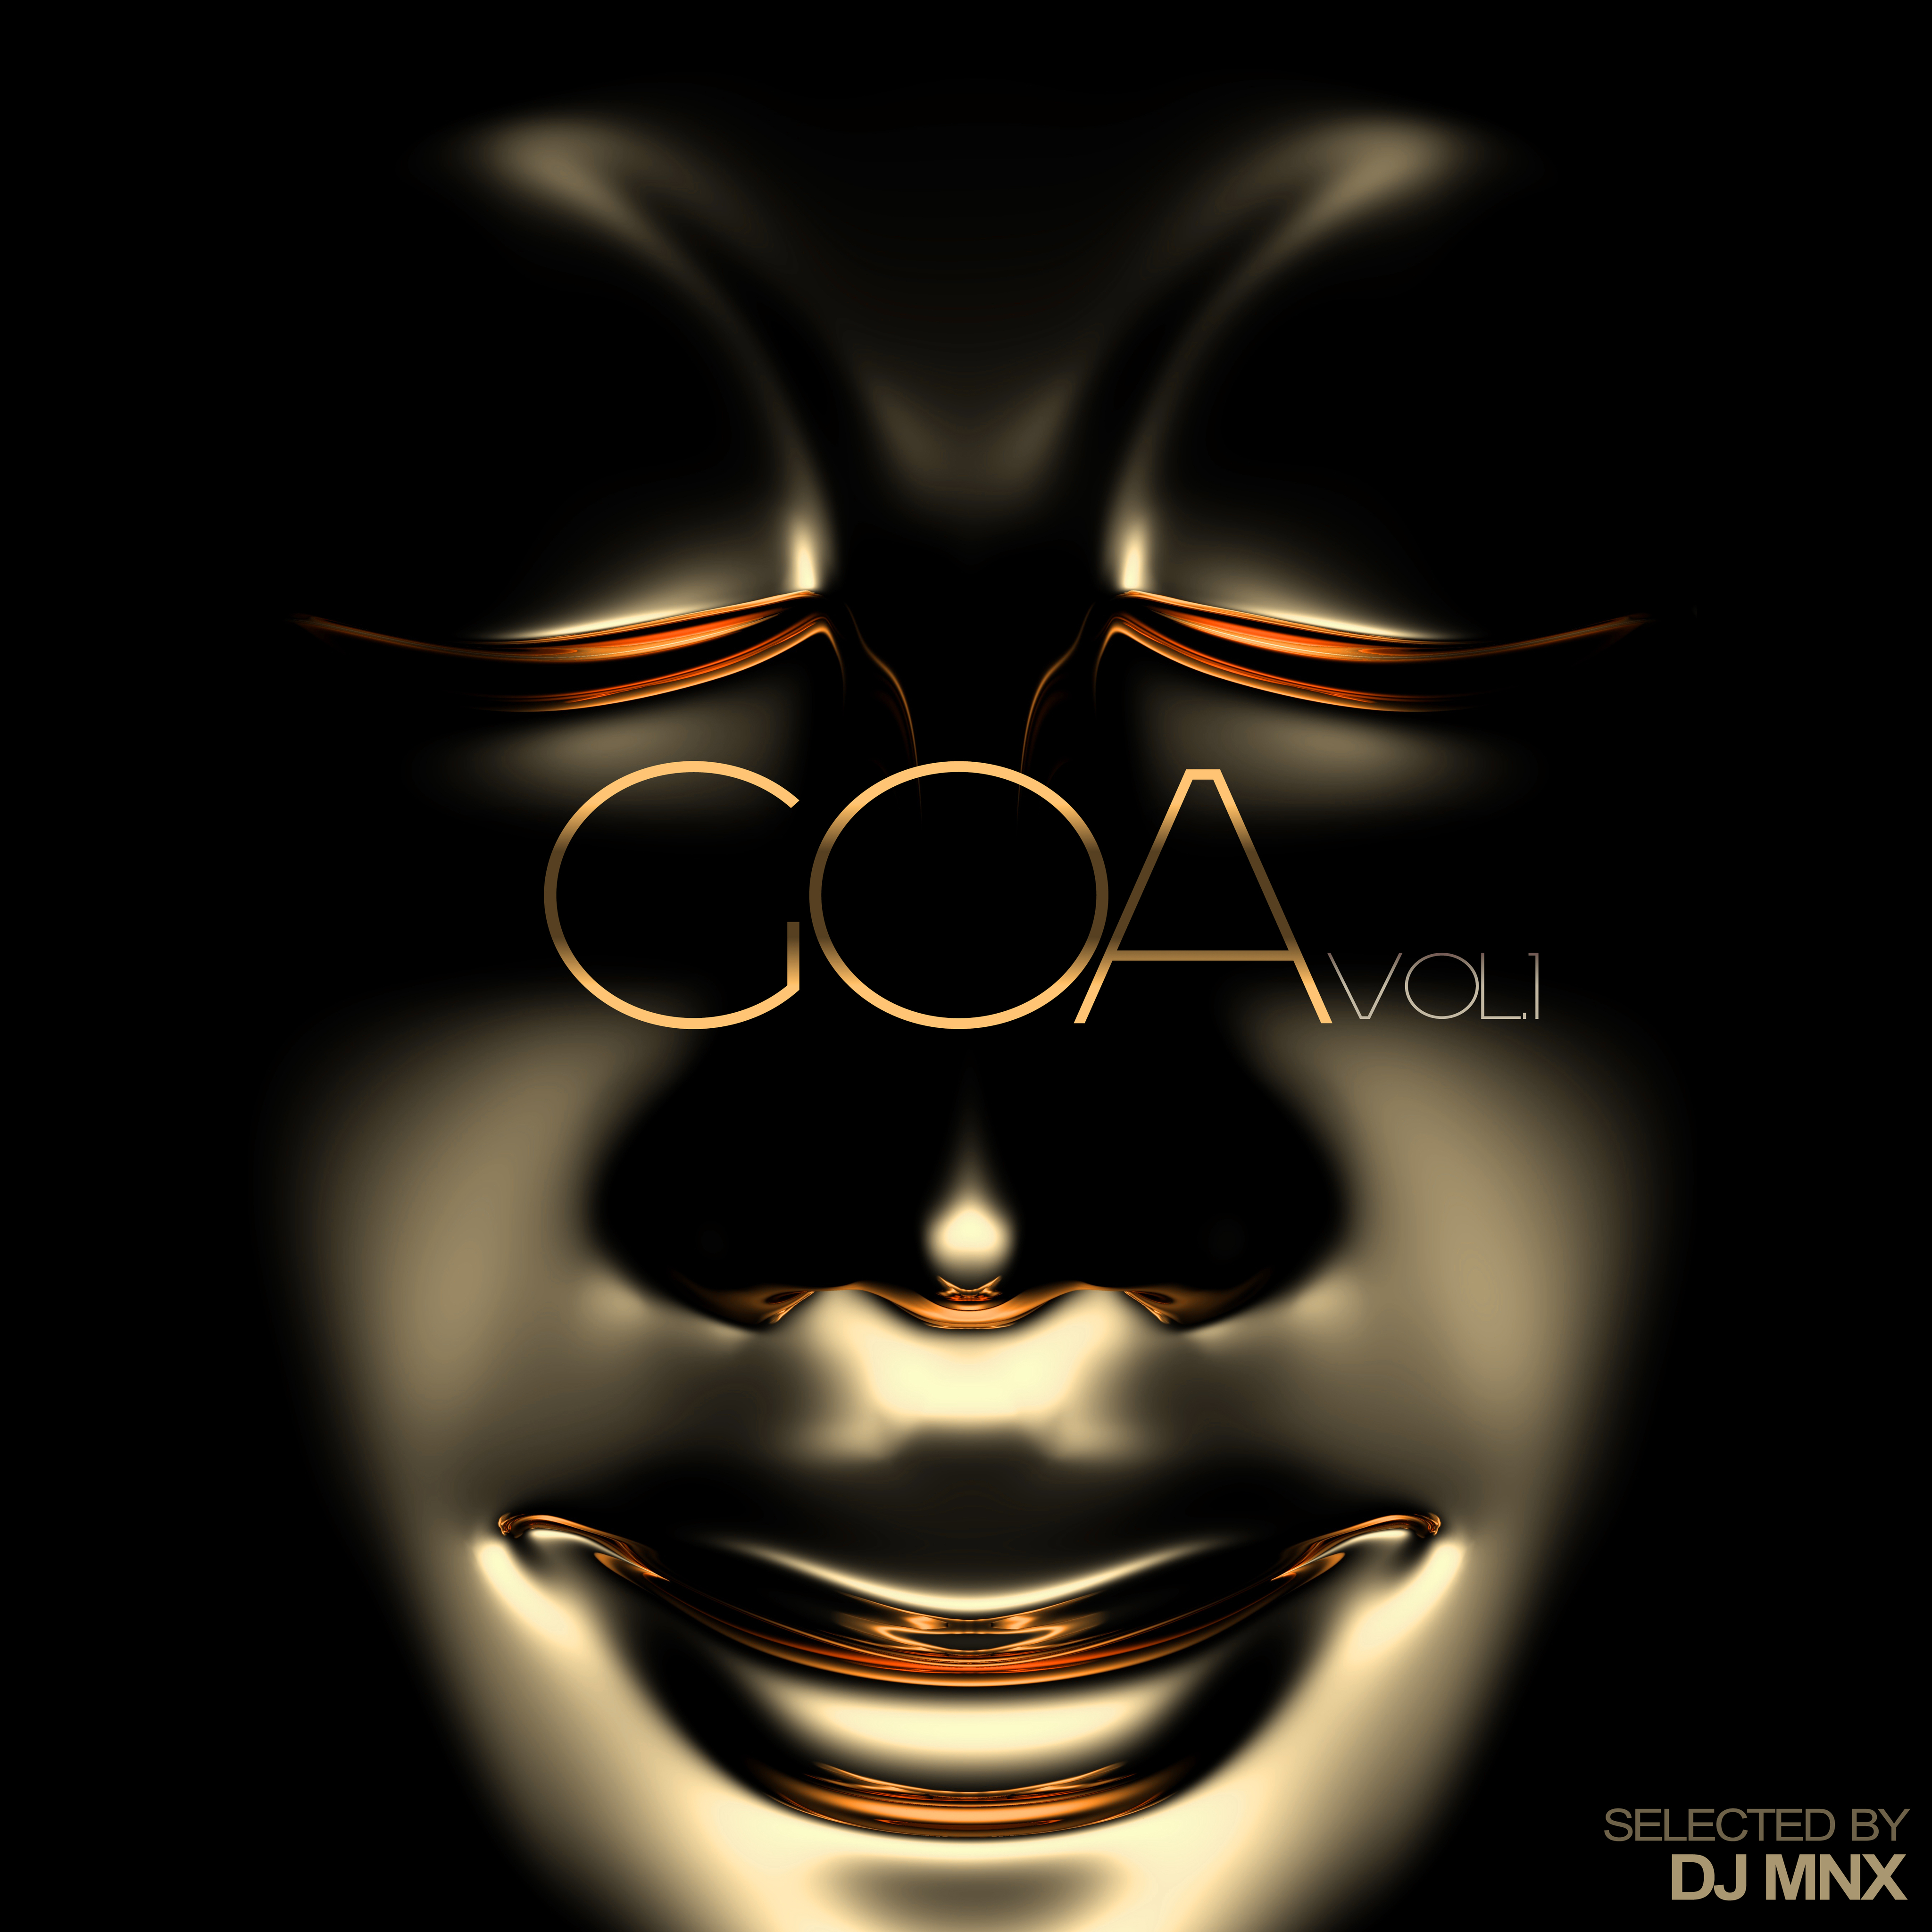 Goa, Vol. 1 (Selected By DJ MMX)